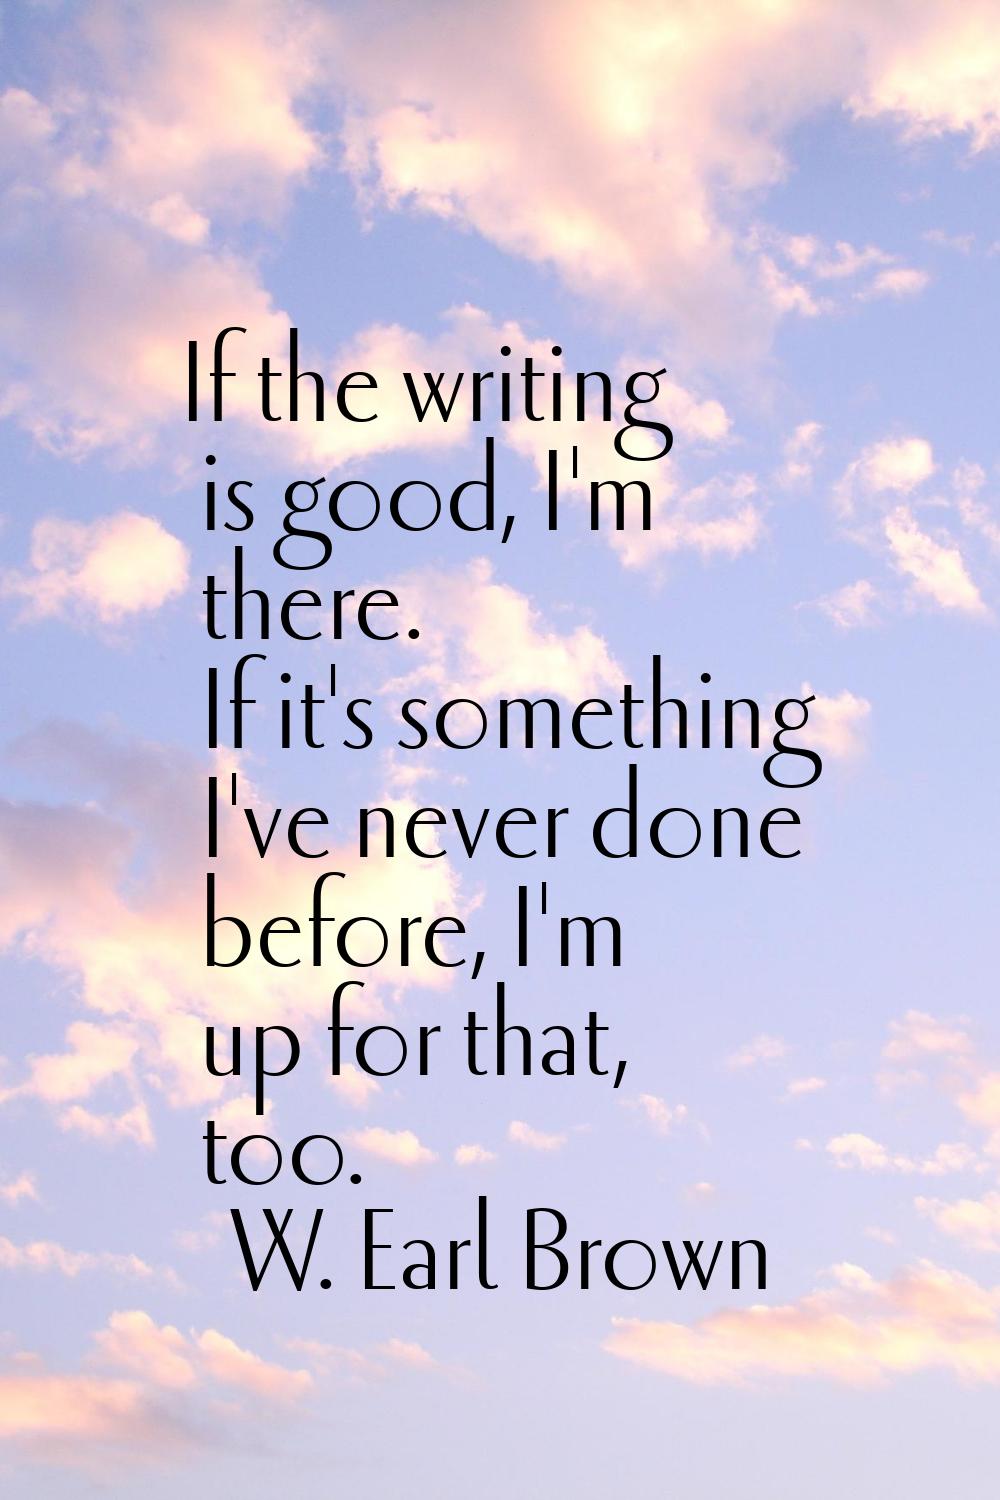 If the writing is good, I'm there. If it's something I've never done before, I'm up for that, too.